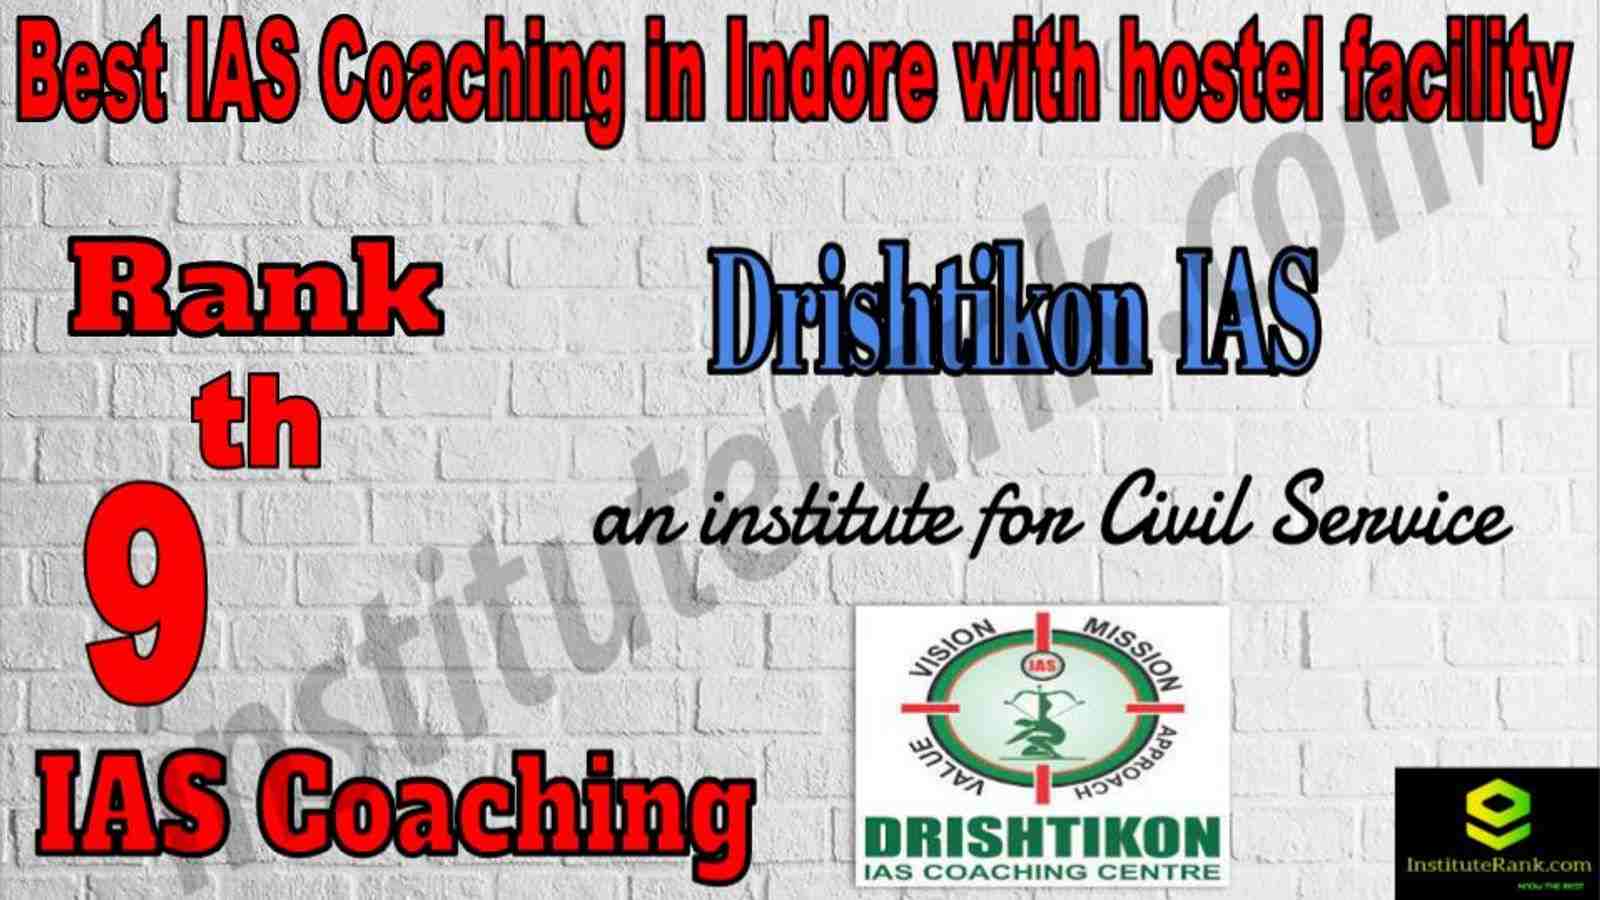 9th Best IAS Coaching in Indore with hostel Facility